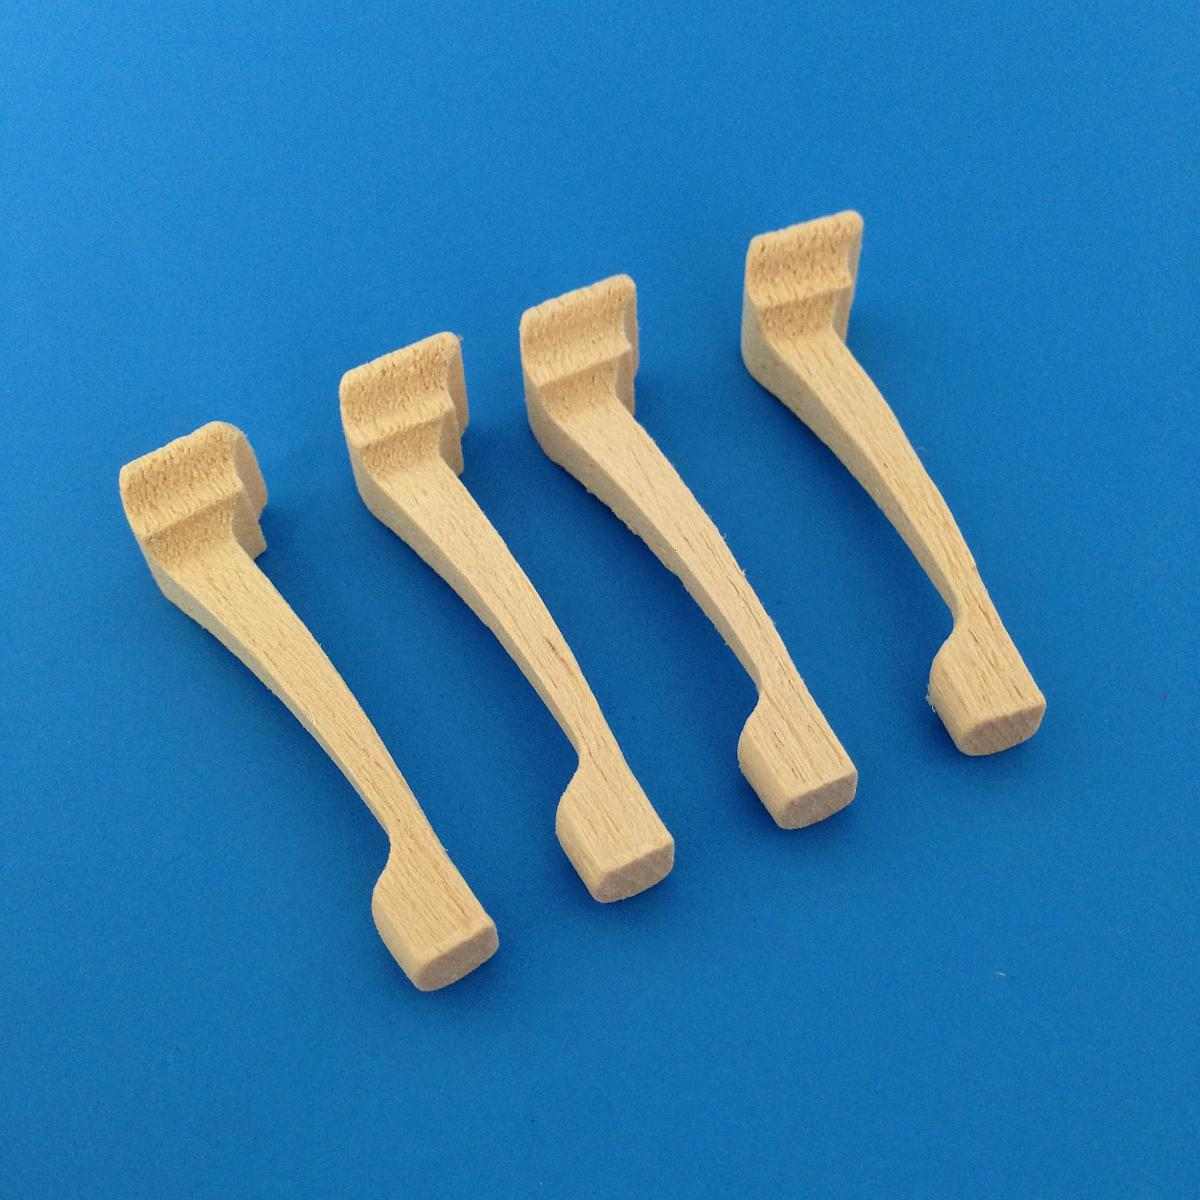 Chippendale legs, 40 mm